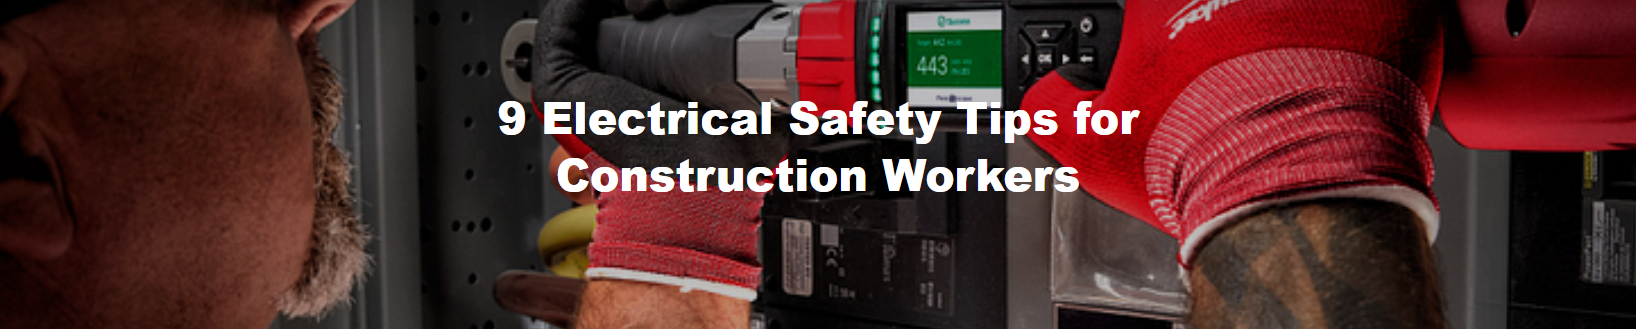 9 Electrical Safety Tips for Construction Workers